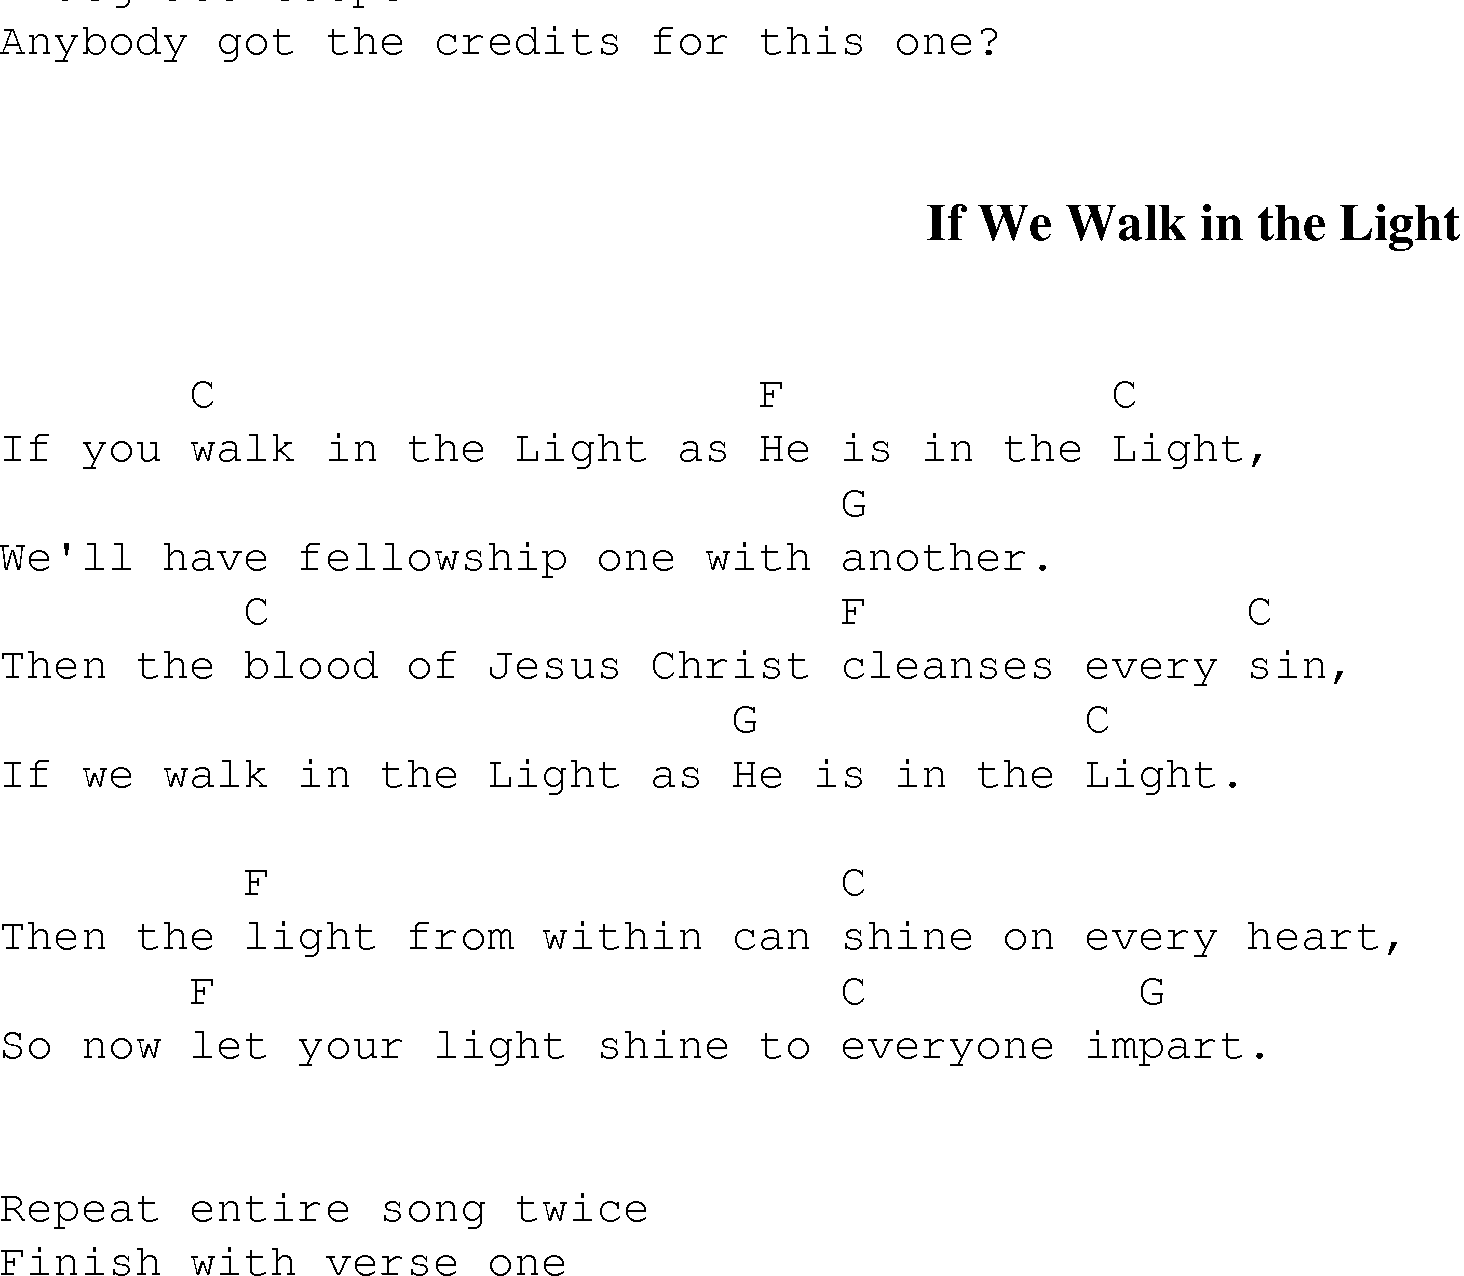 Gospel Song: if_we_walk_in_the_light, lyrics and chords.